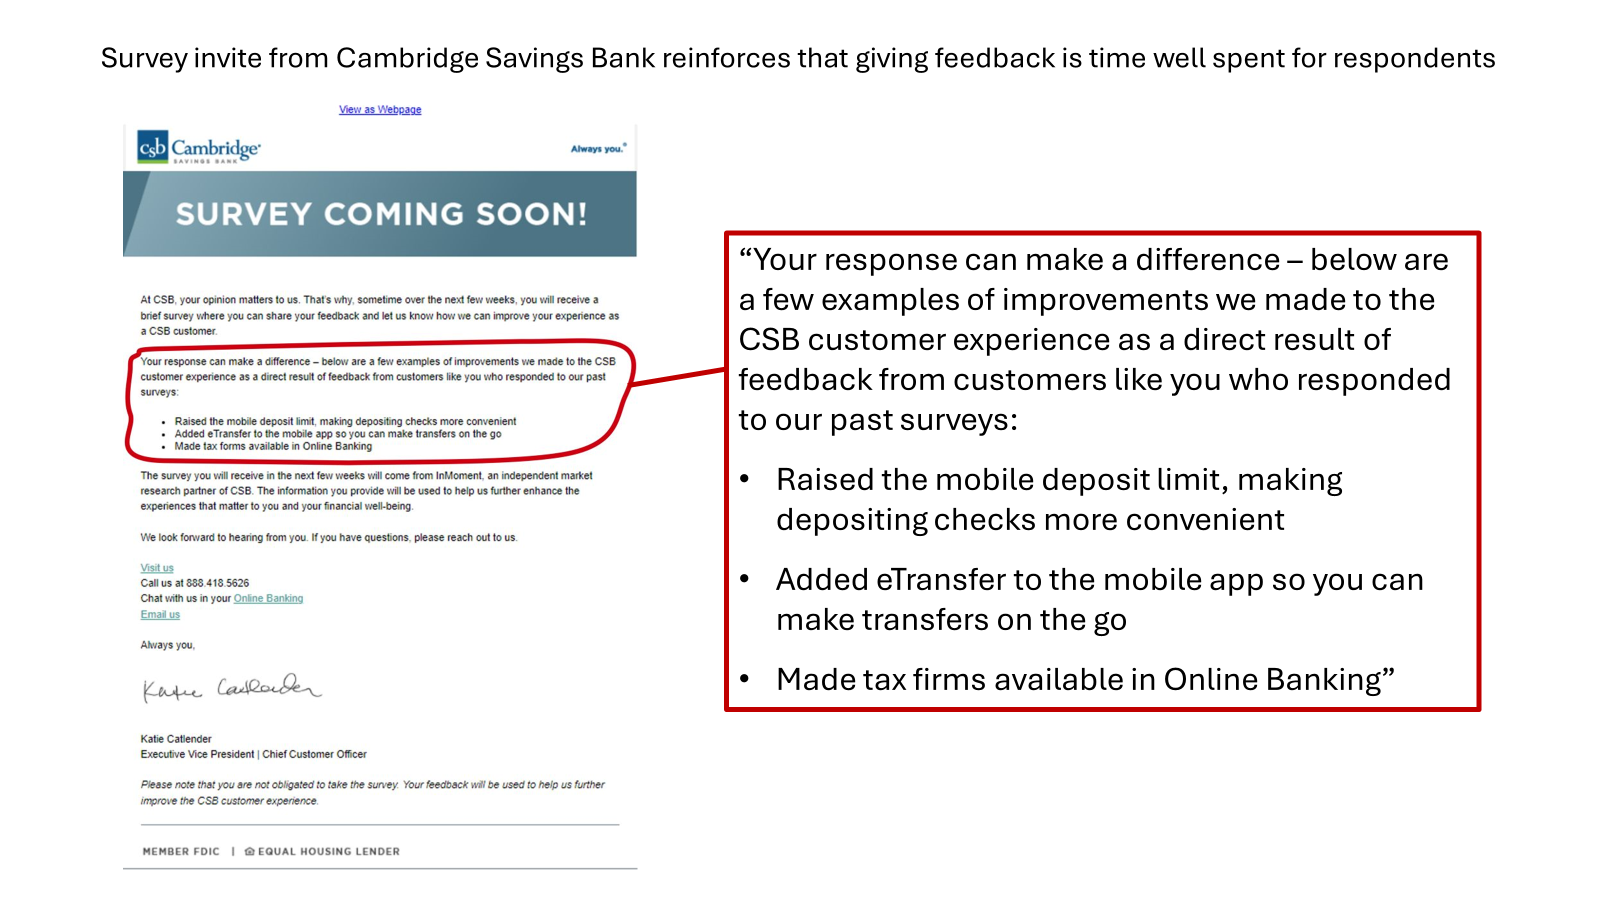 customer survey invite from Cambridge Savings Bank that speciically shows what Cambridge Savings Bank has already done with customer feedback. This reinforces the respondents perception that spending time giving feedback is worth it. That's critical in Voice of customer and CX measurement programs struggling with low response rates